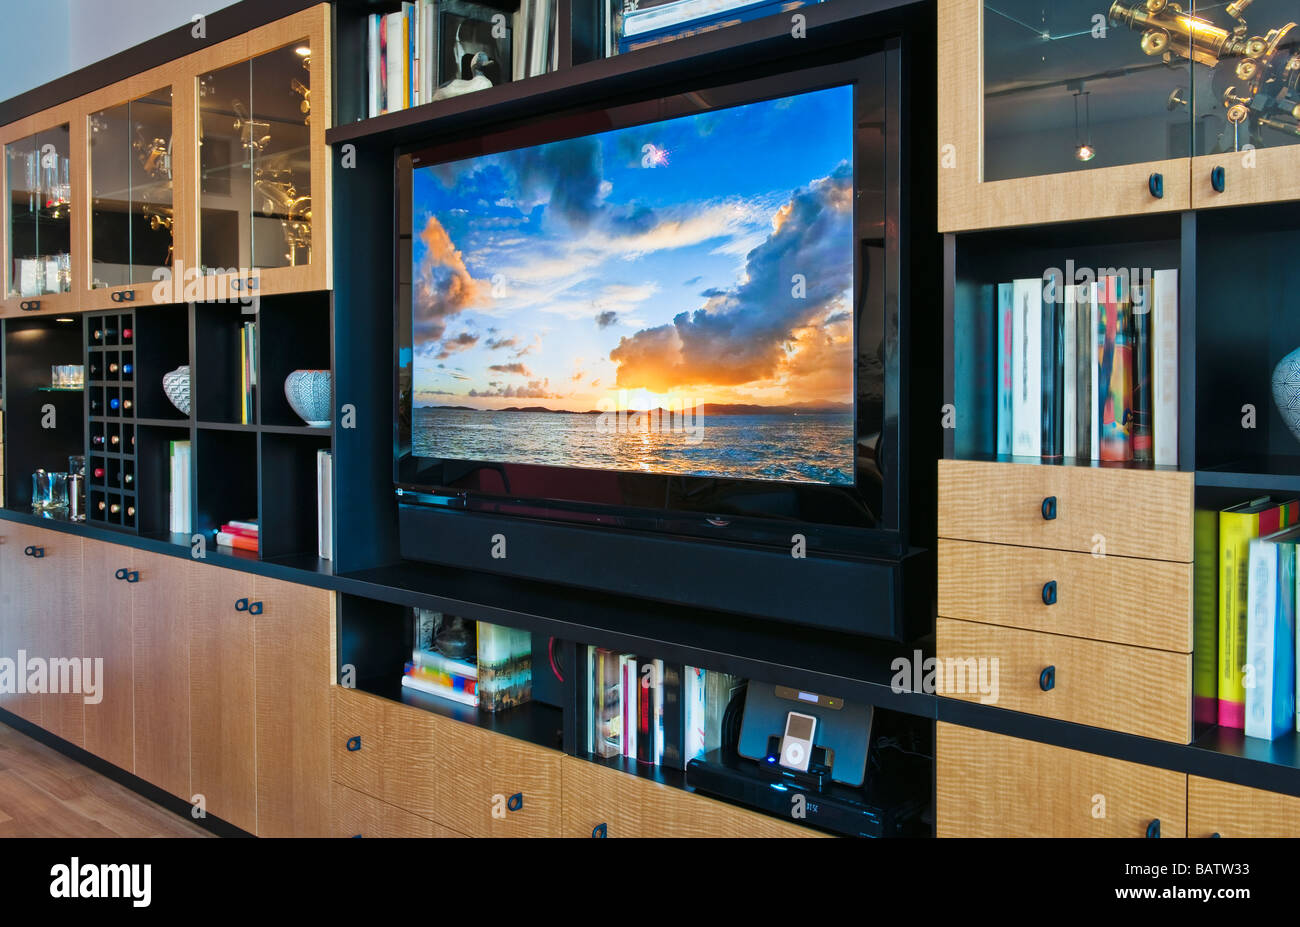 Flat screen TV in luxurious apartment Stock Photo